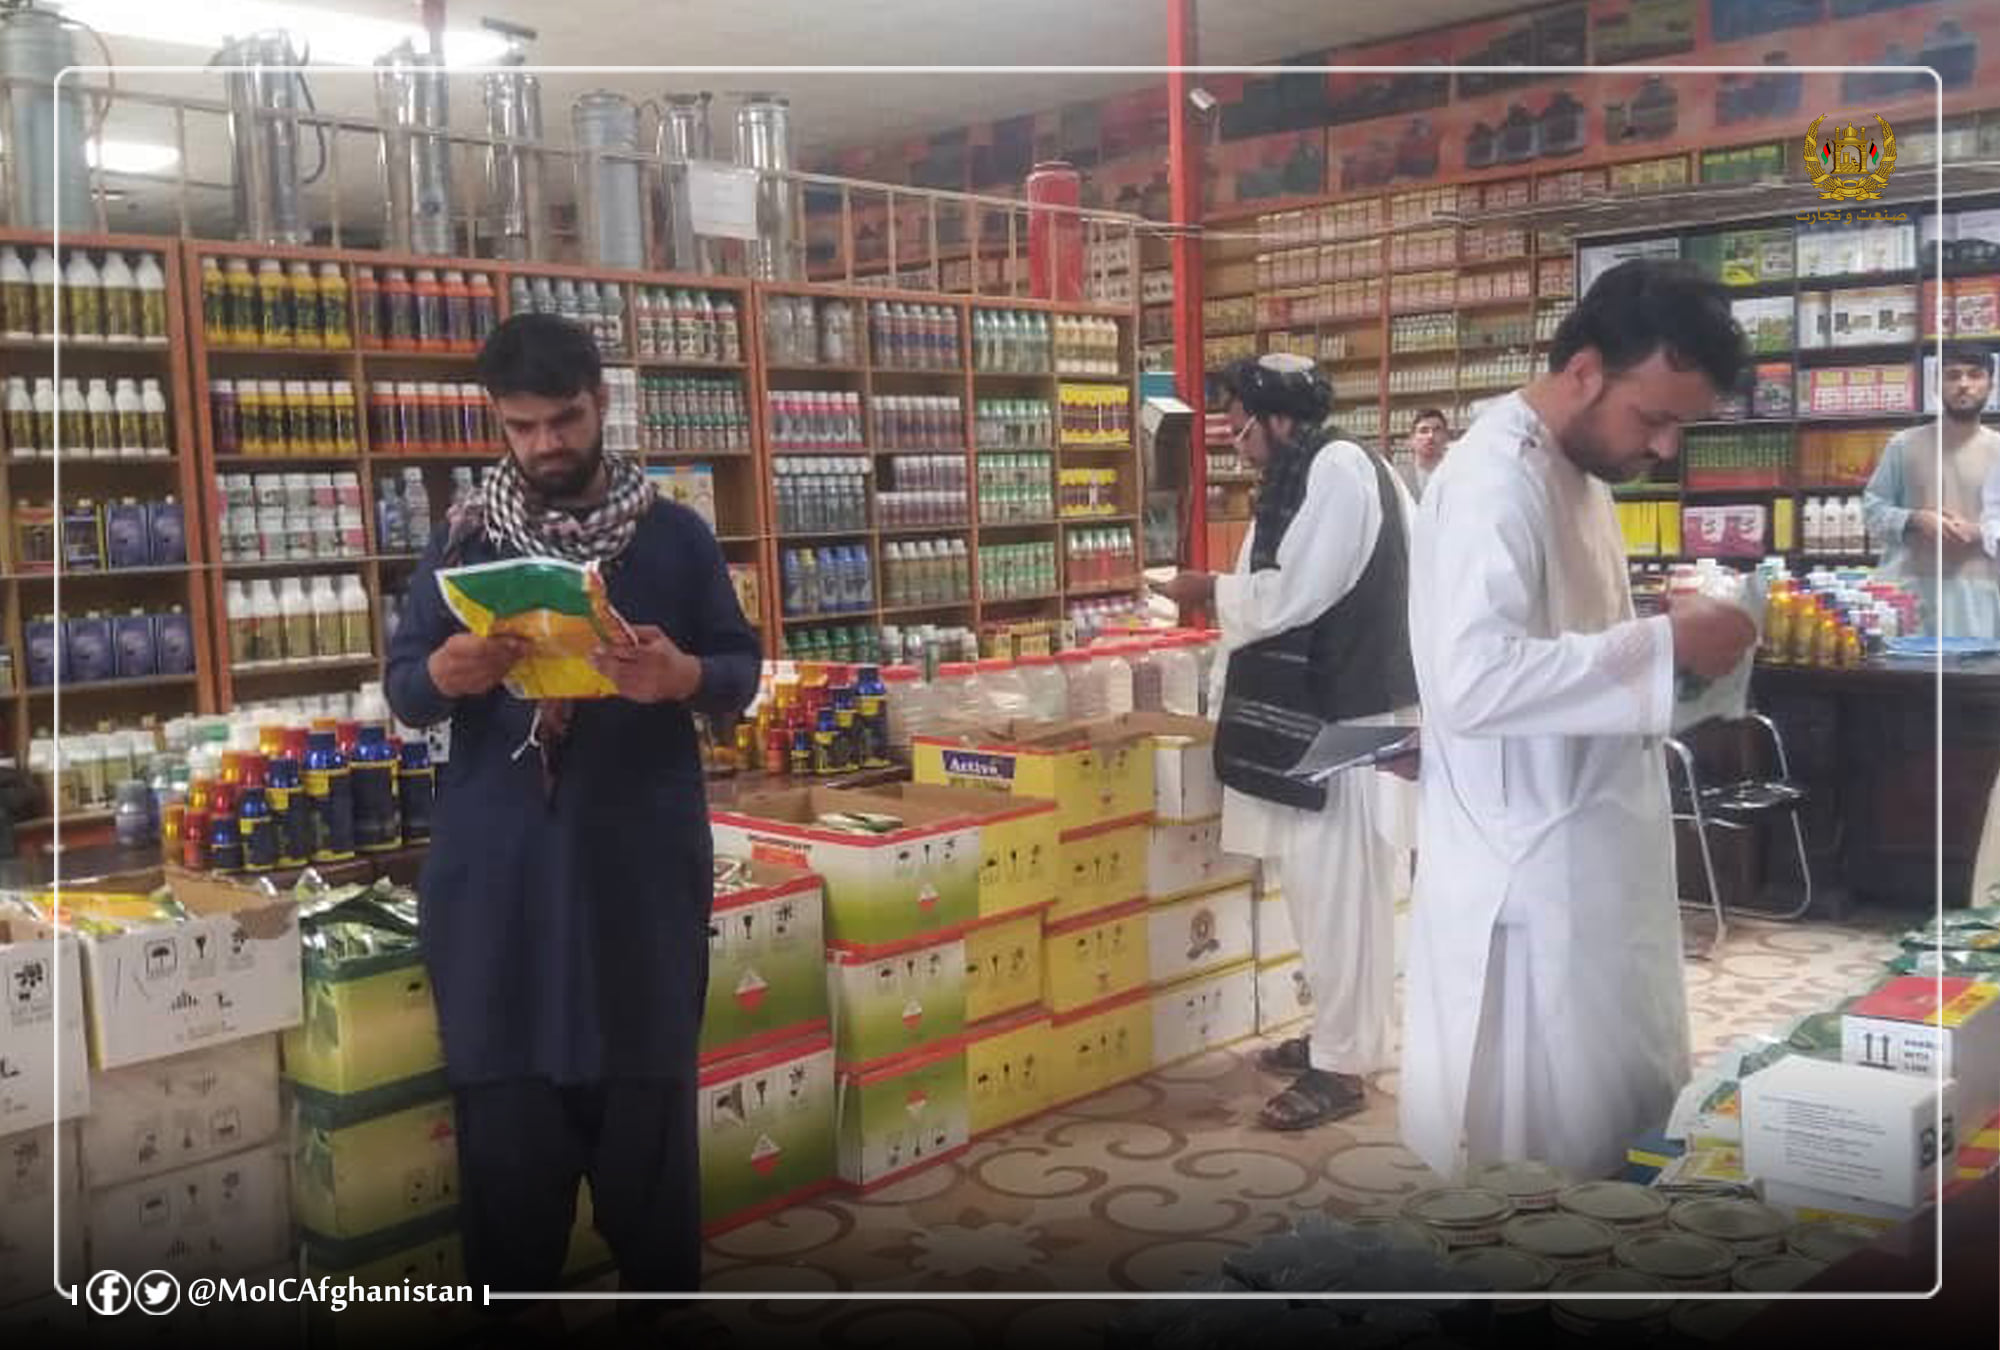 Inspecting the market situation in Kandahar province